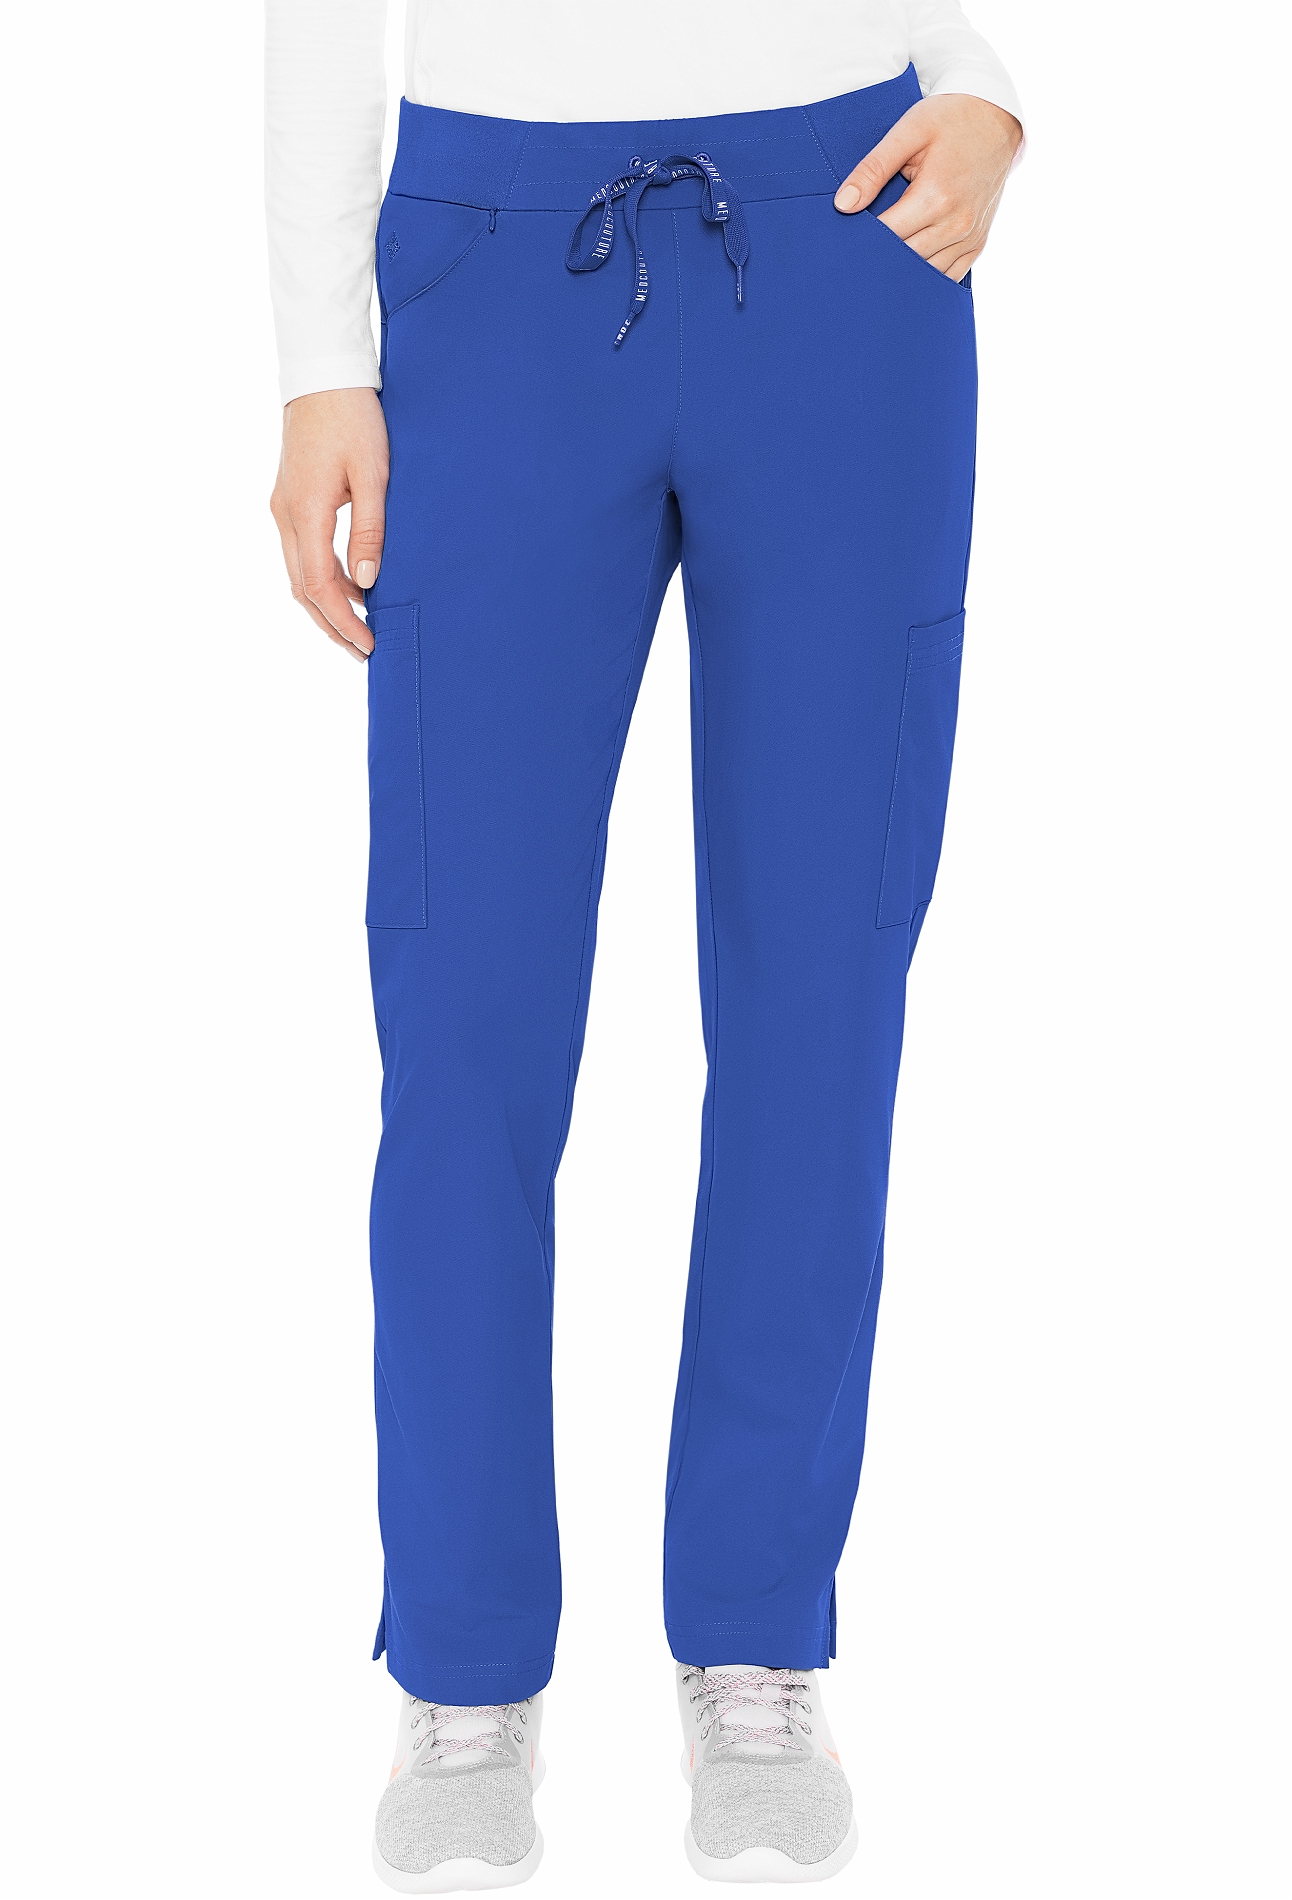 Med Couture Peaches Women's Scoop Pocket Pant-8733 | Medical Scrubs ...